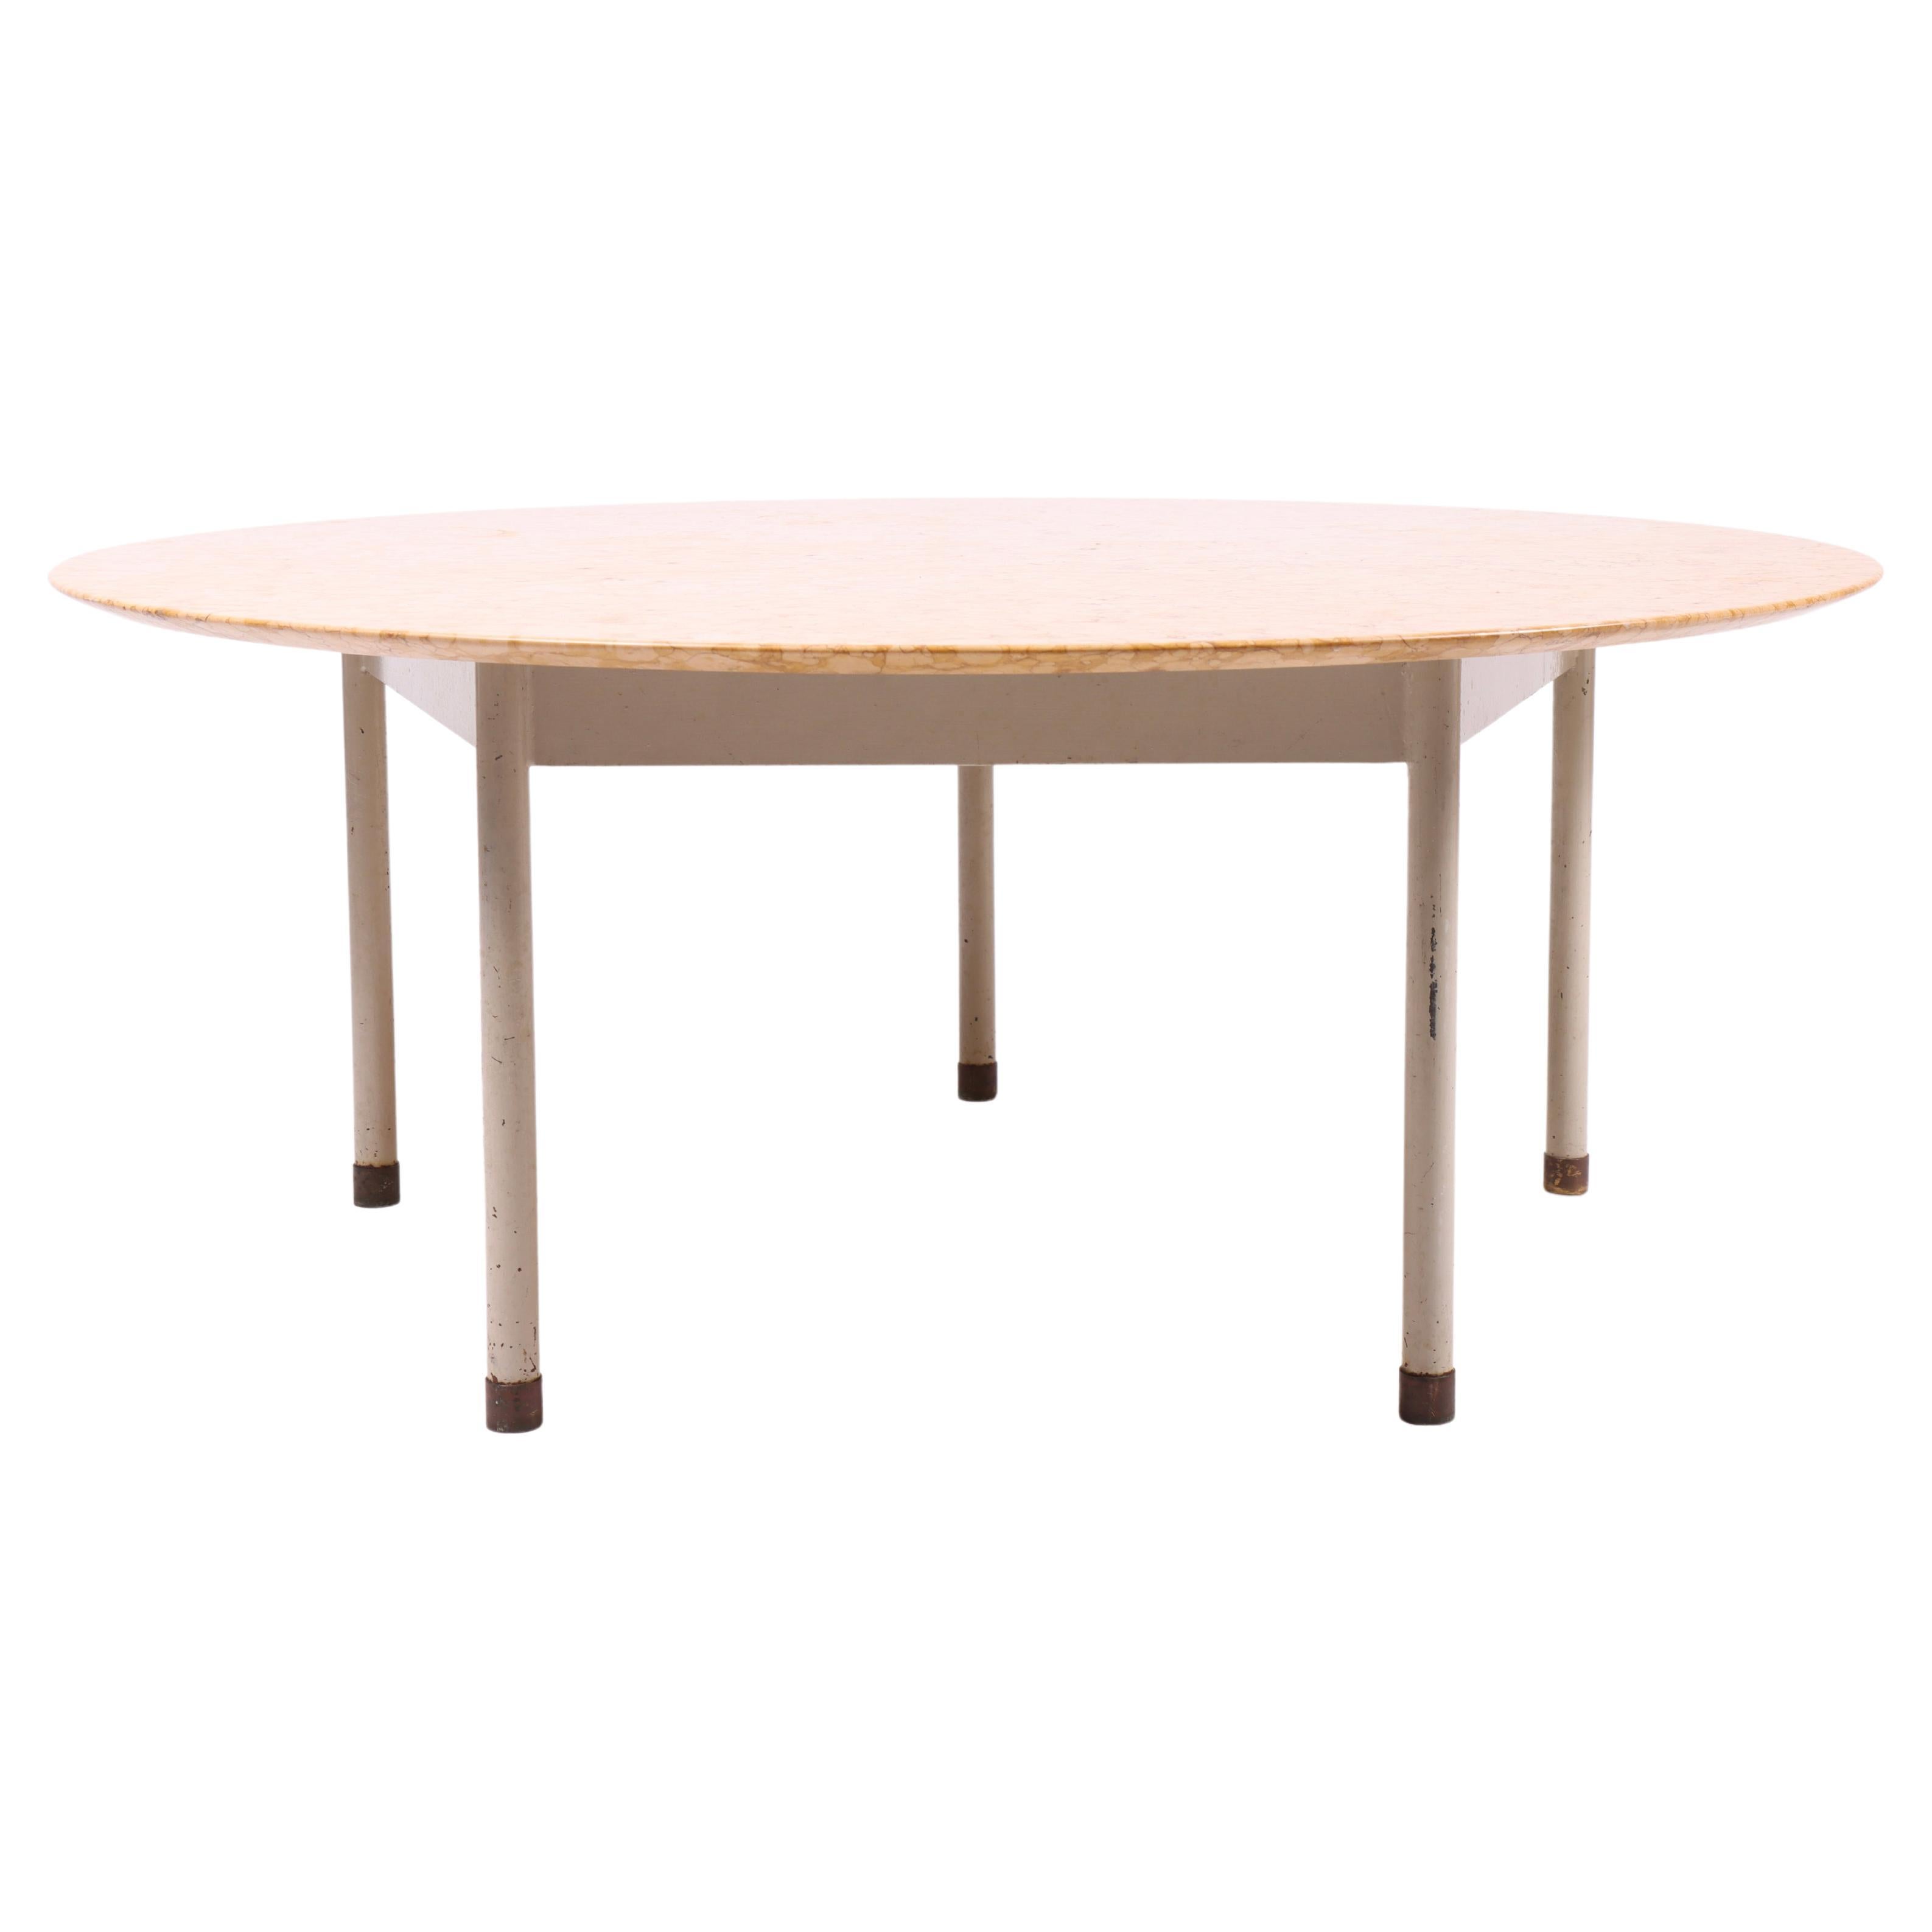 Midcentury Circular Low Table with Red Verona Marble Top by Acton Bjørn. For Sale